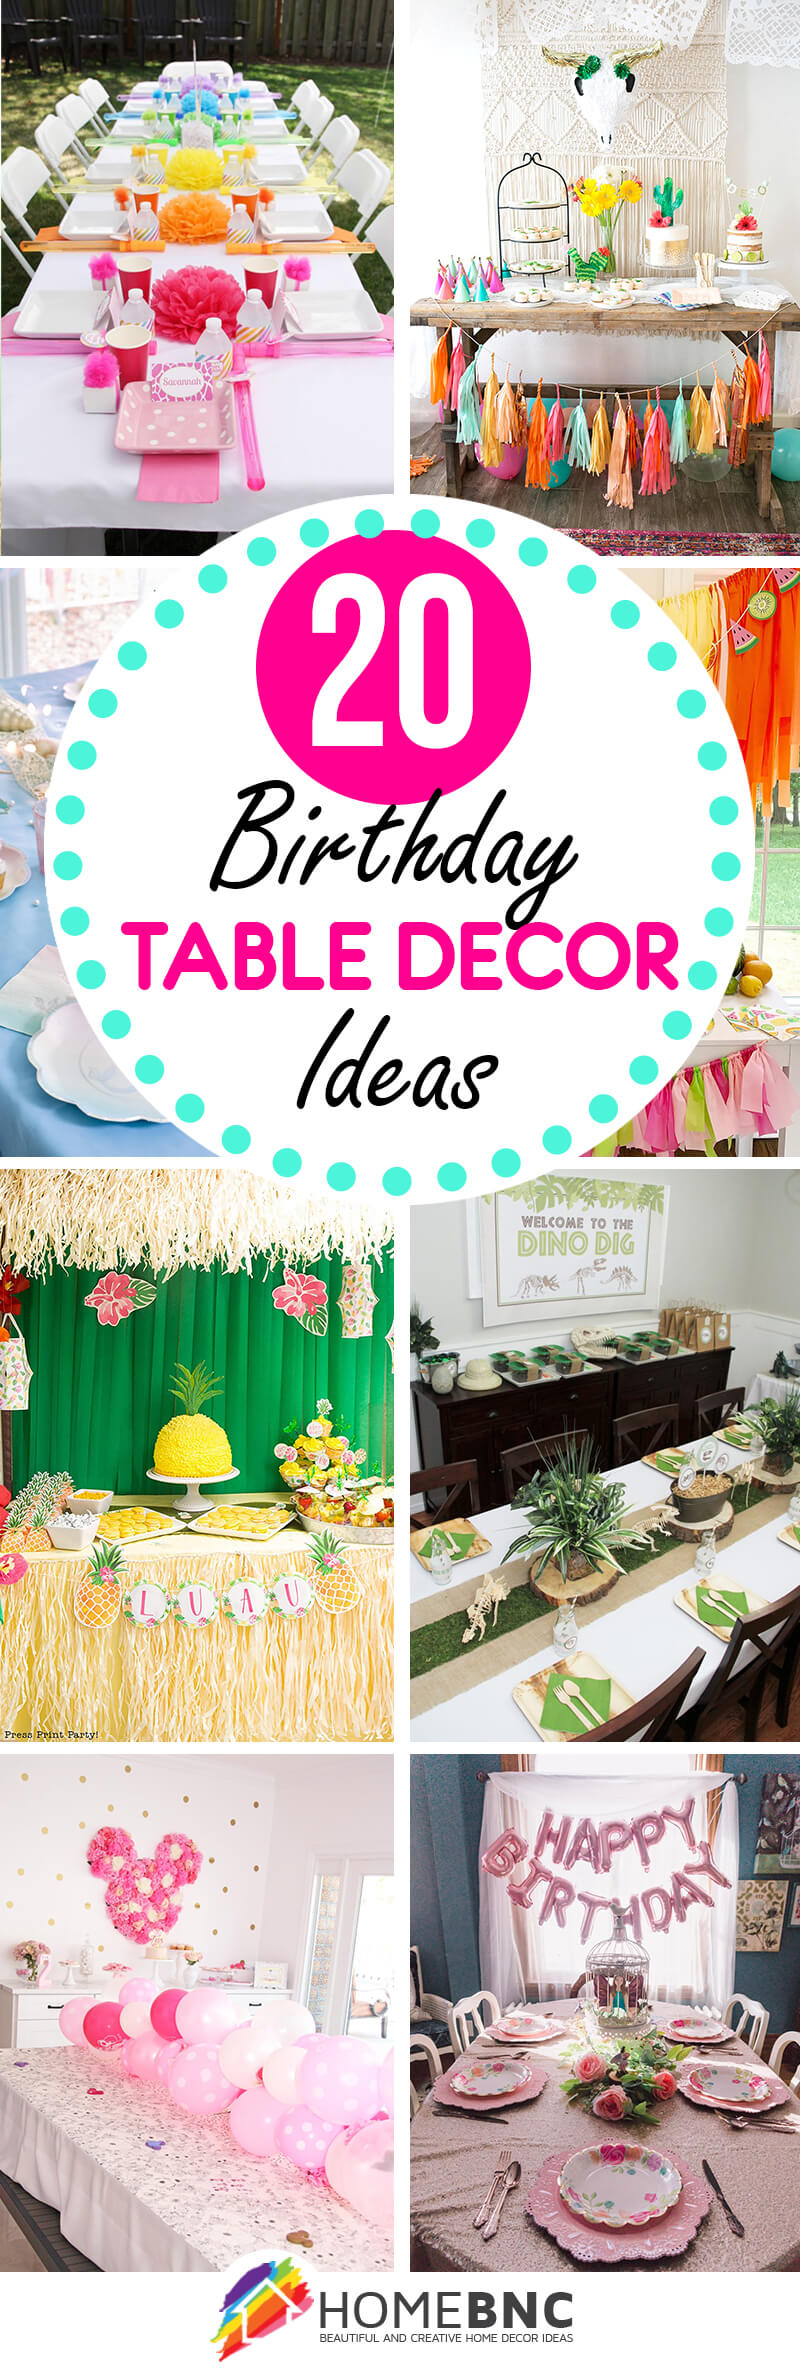 Party Decorations & Supplies for Birthdays & More | Ginger Ray